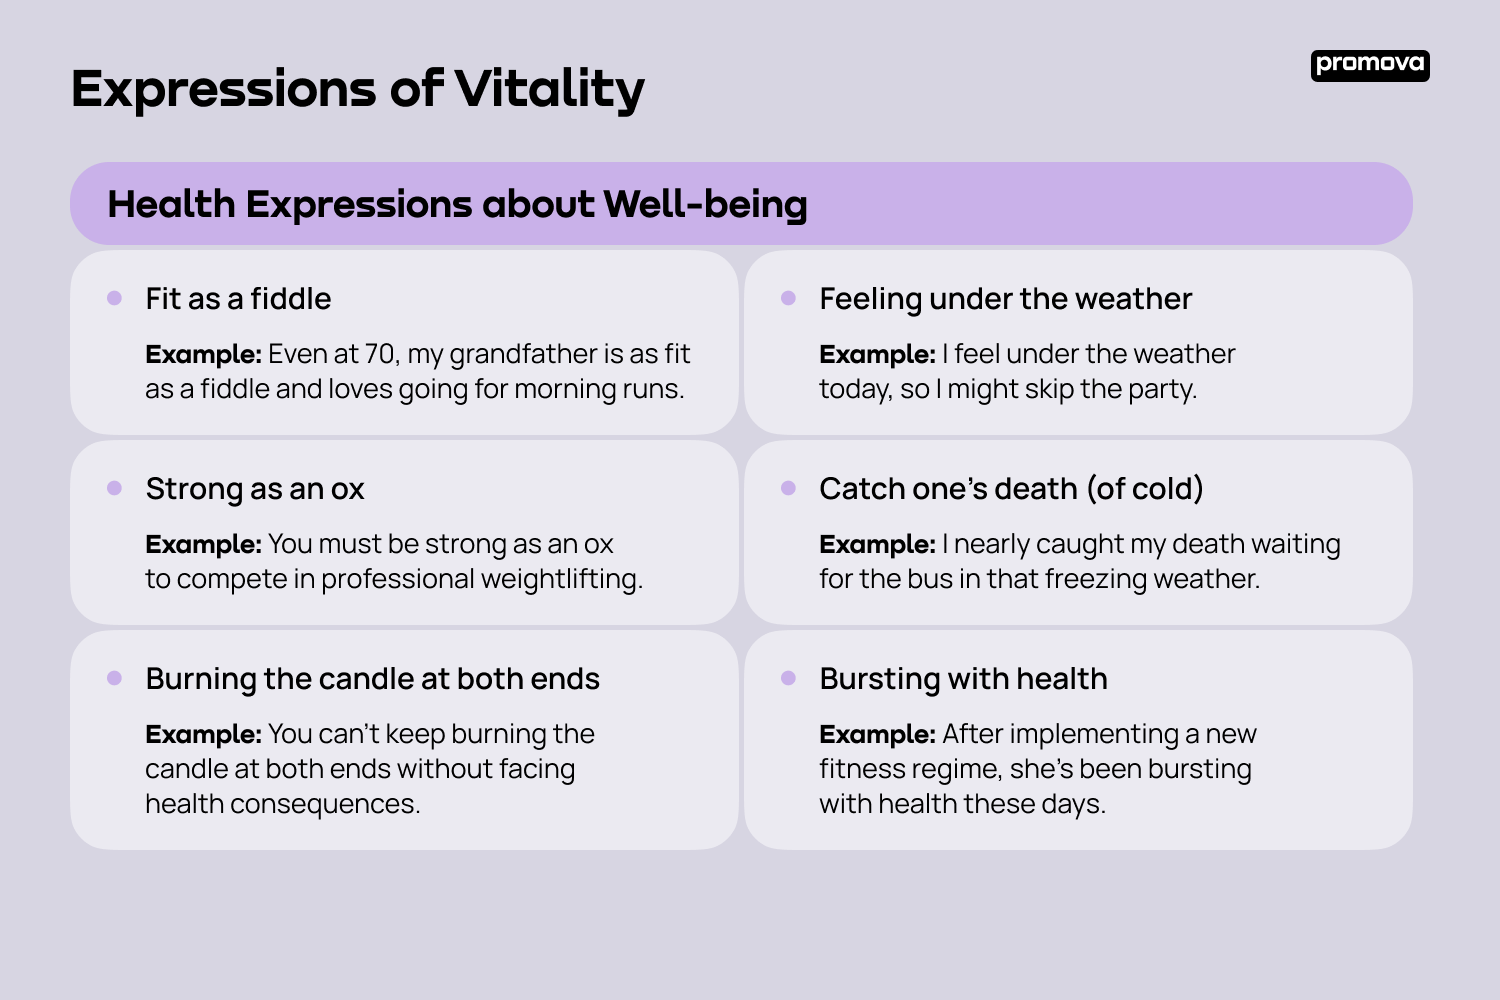 Discover All About the Health Expressions about Well-being